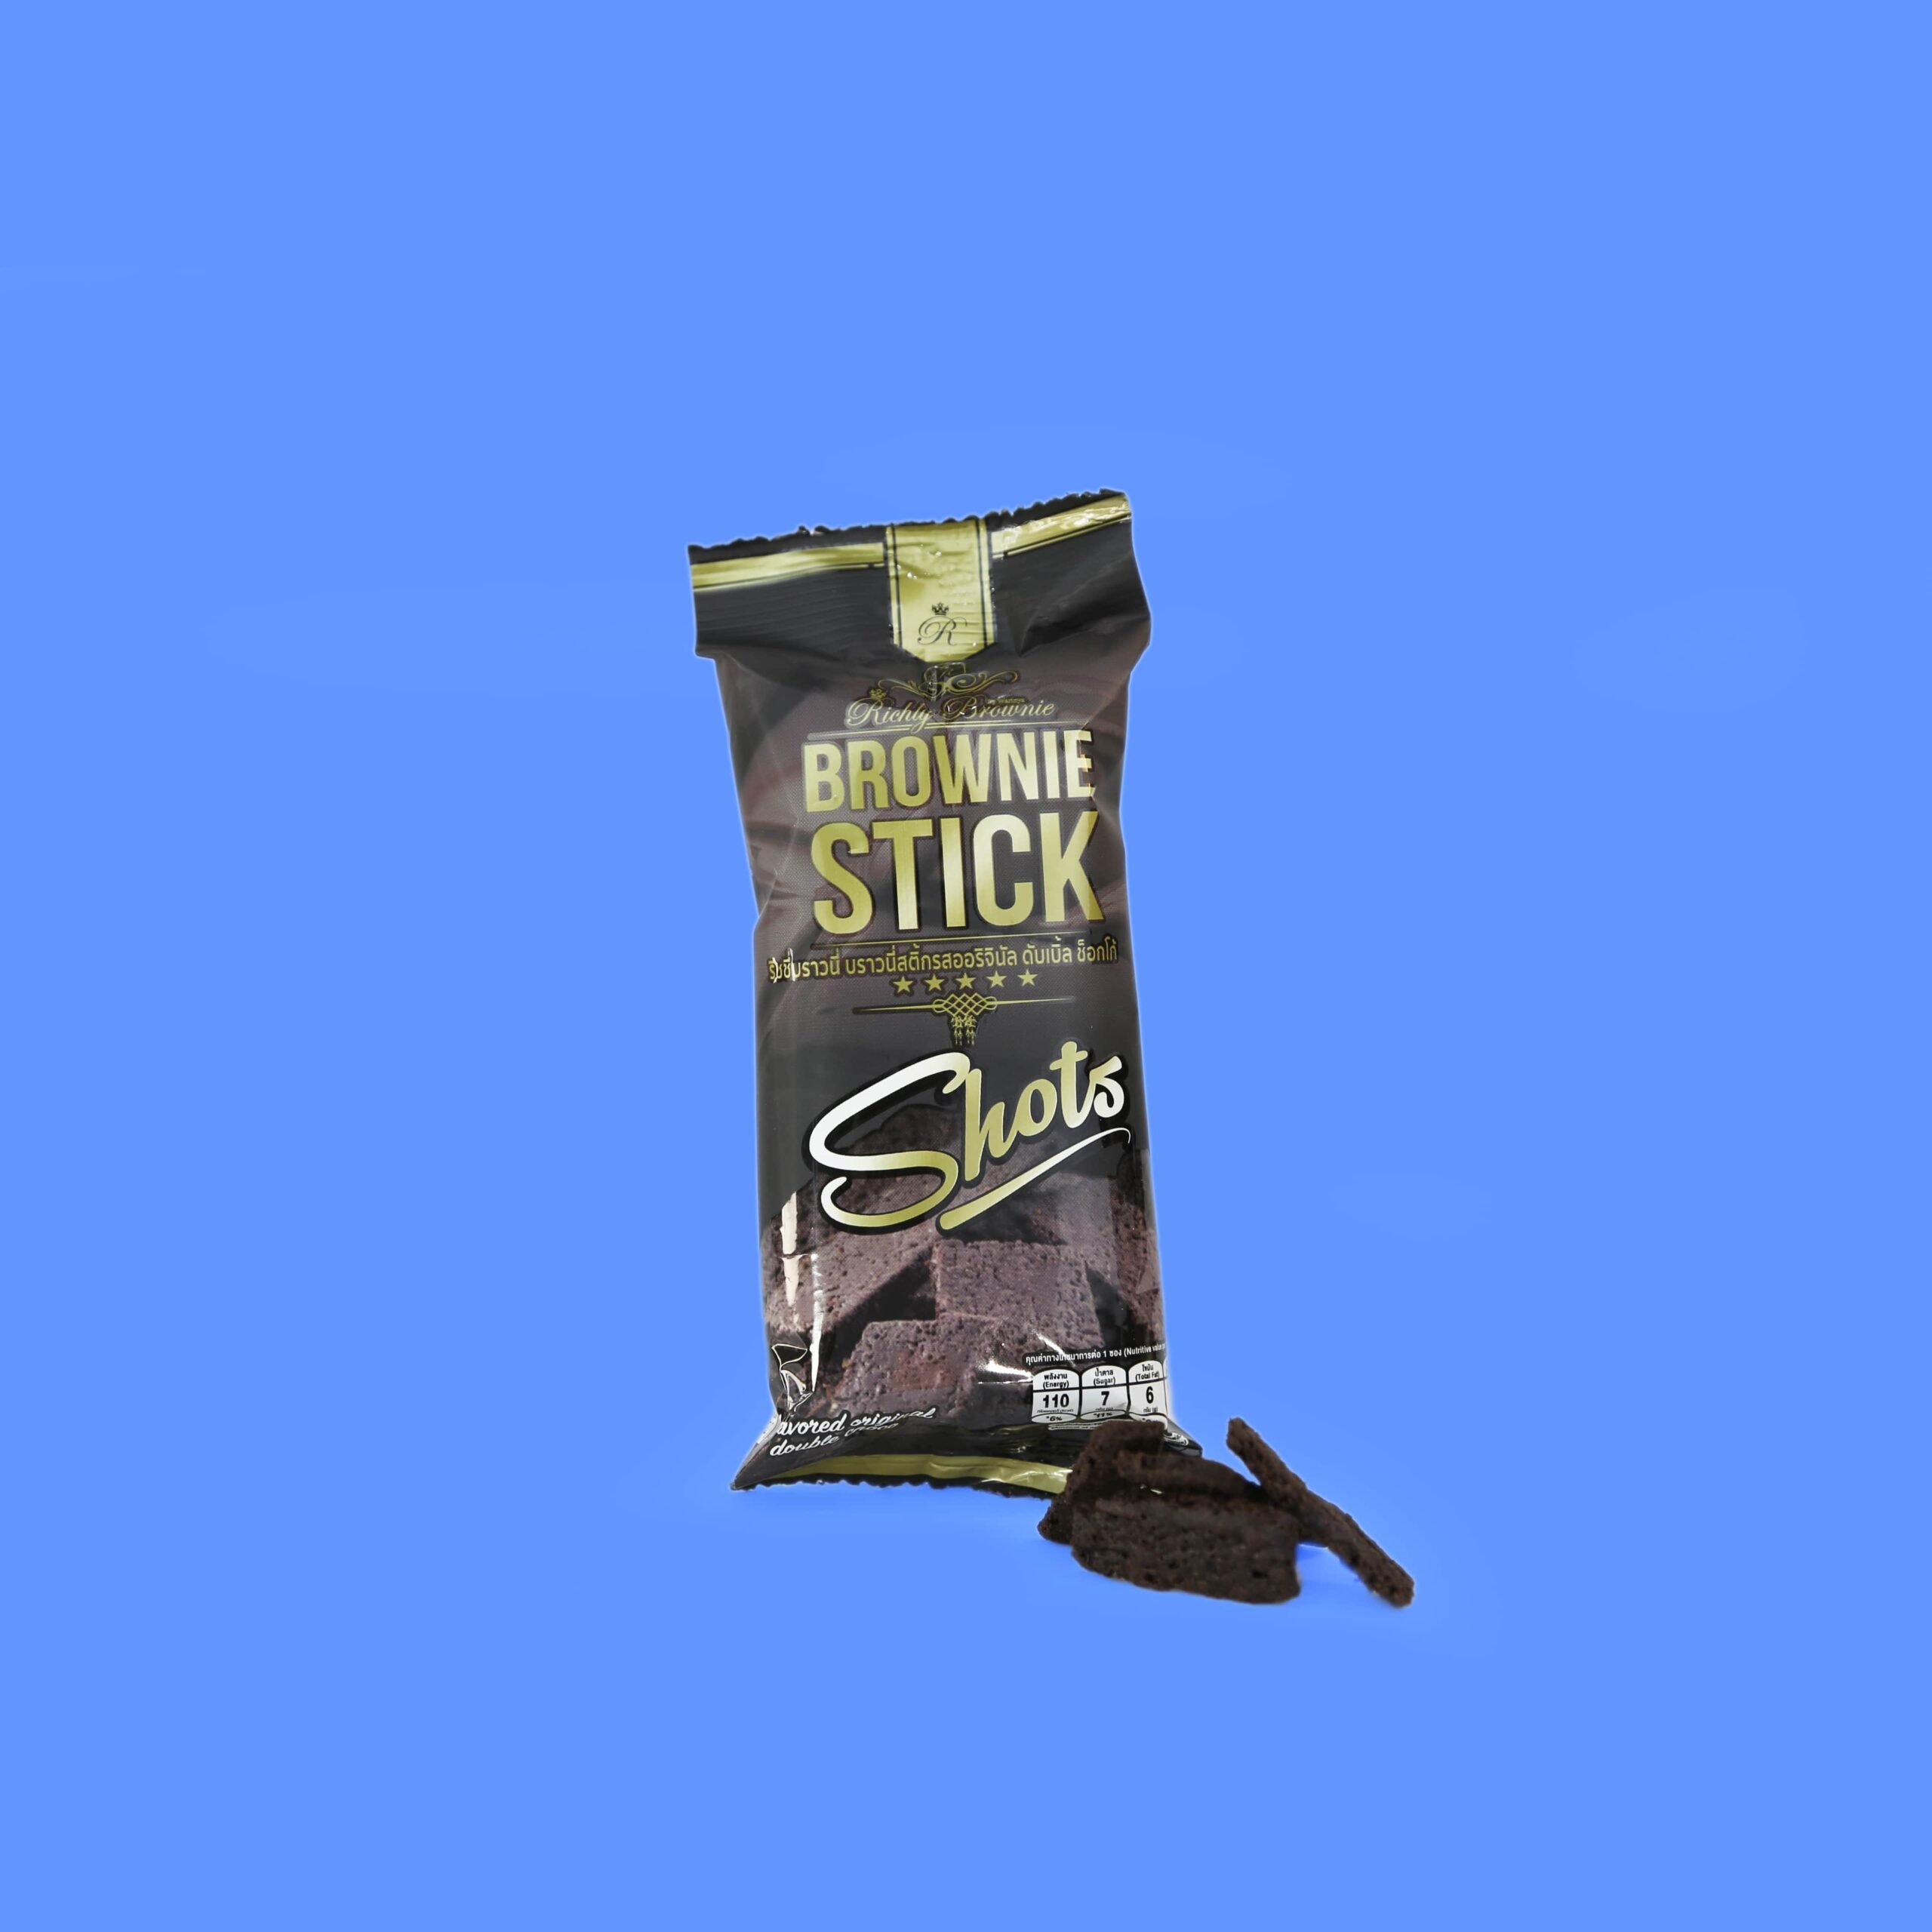 Richly brownie brand brownie stick snack in shots. Small package made in thailand